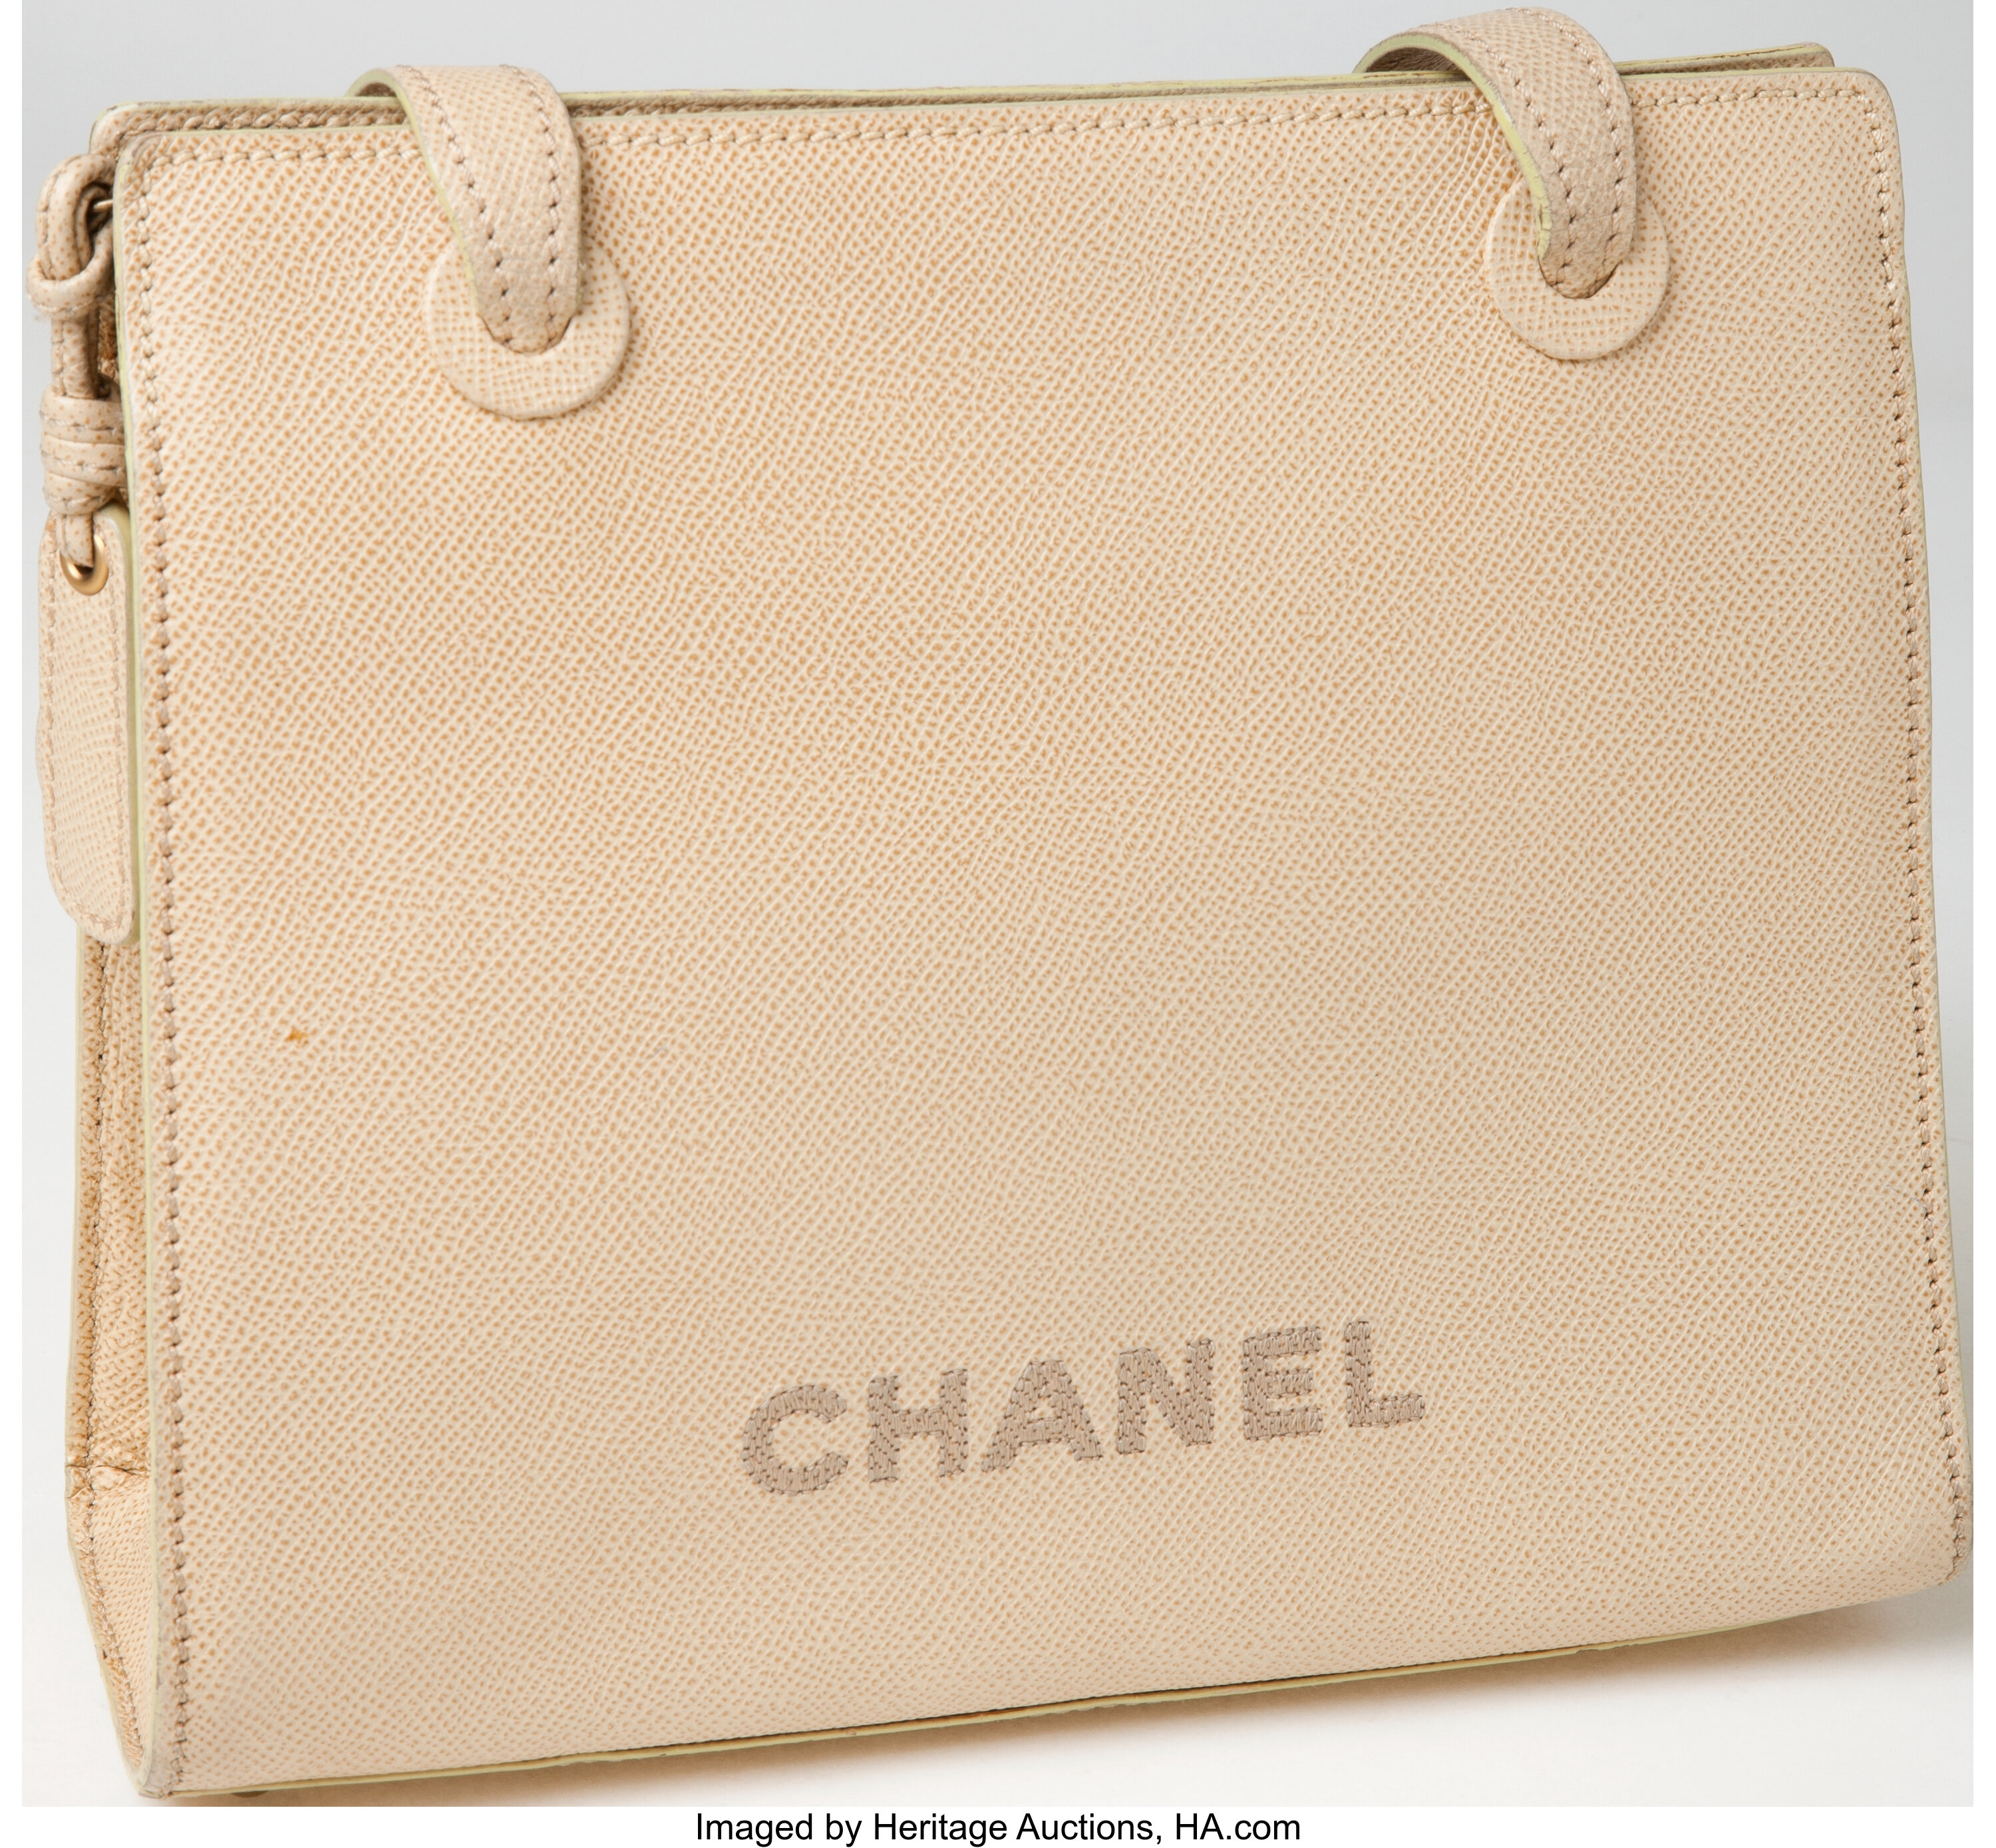 Sold at Auction: Vintage Chanel quilted white lambskin cylinder bag